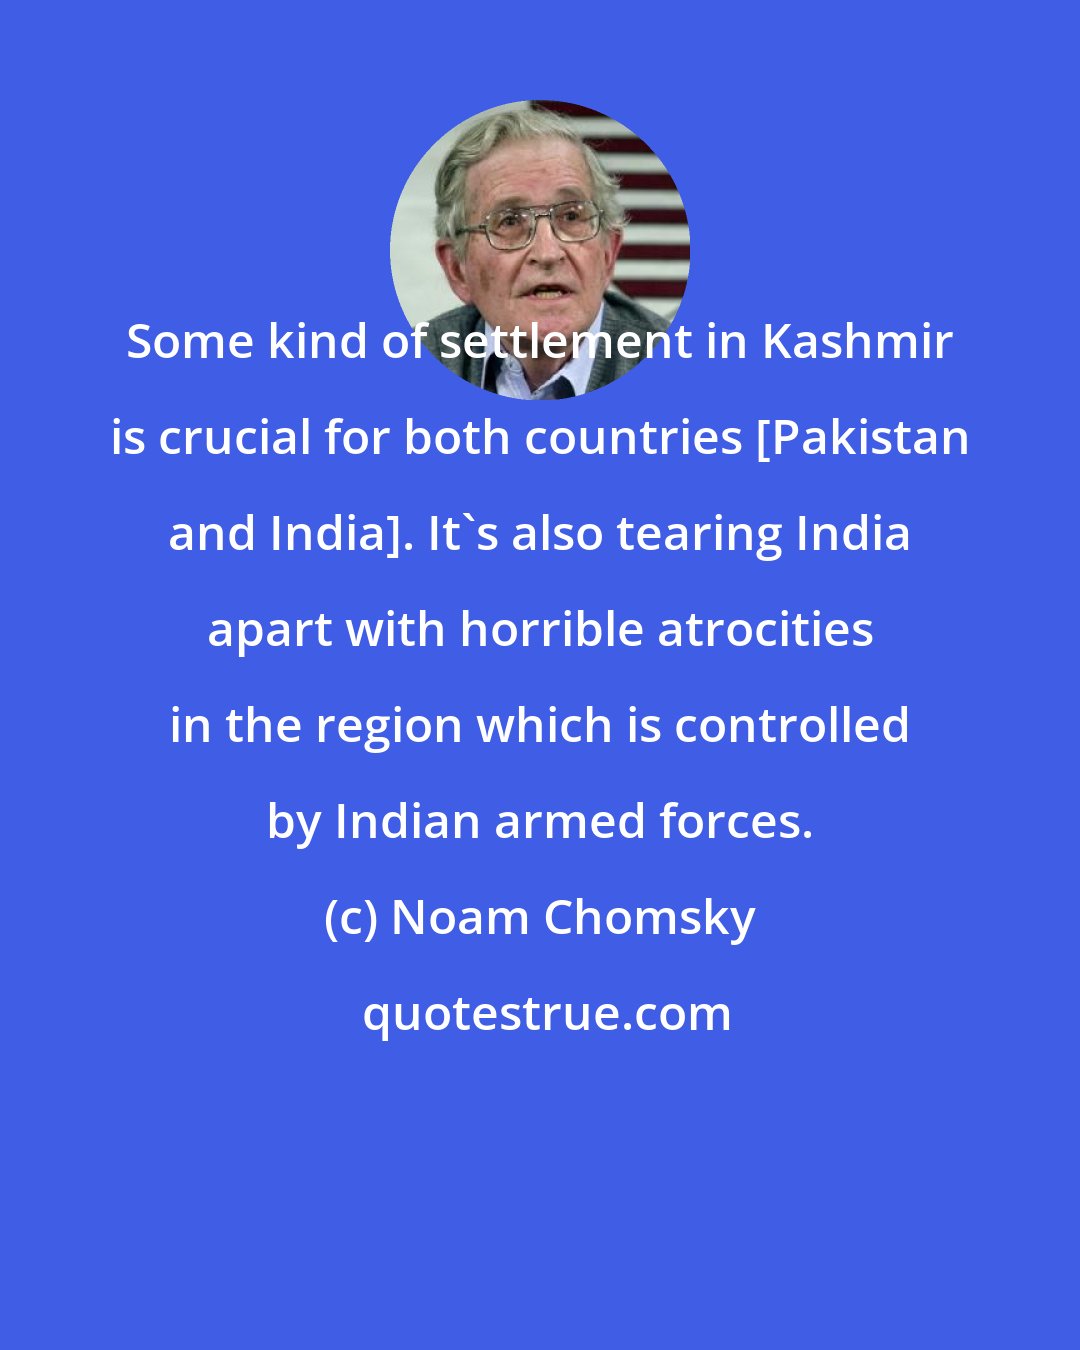 Noam Chomsky: Some kind of settlement in Kashmir is crucial for both countries [Pakistan and India]. It's also tearing India apart with horrible atrocities in the region which is controlled by Indian armed forces.